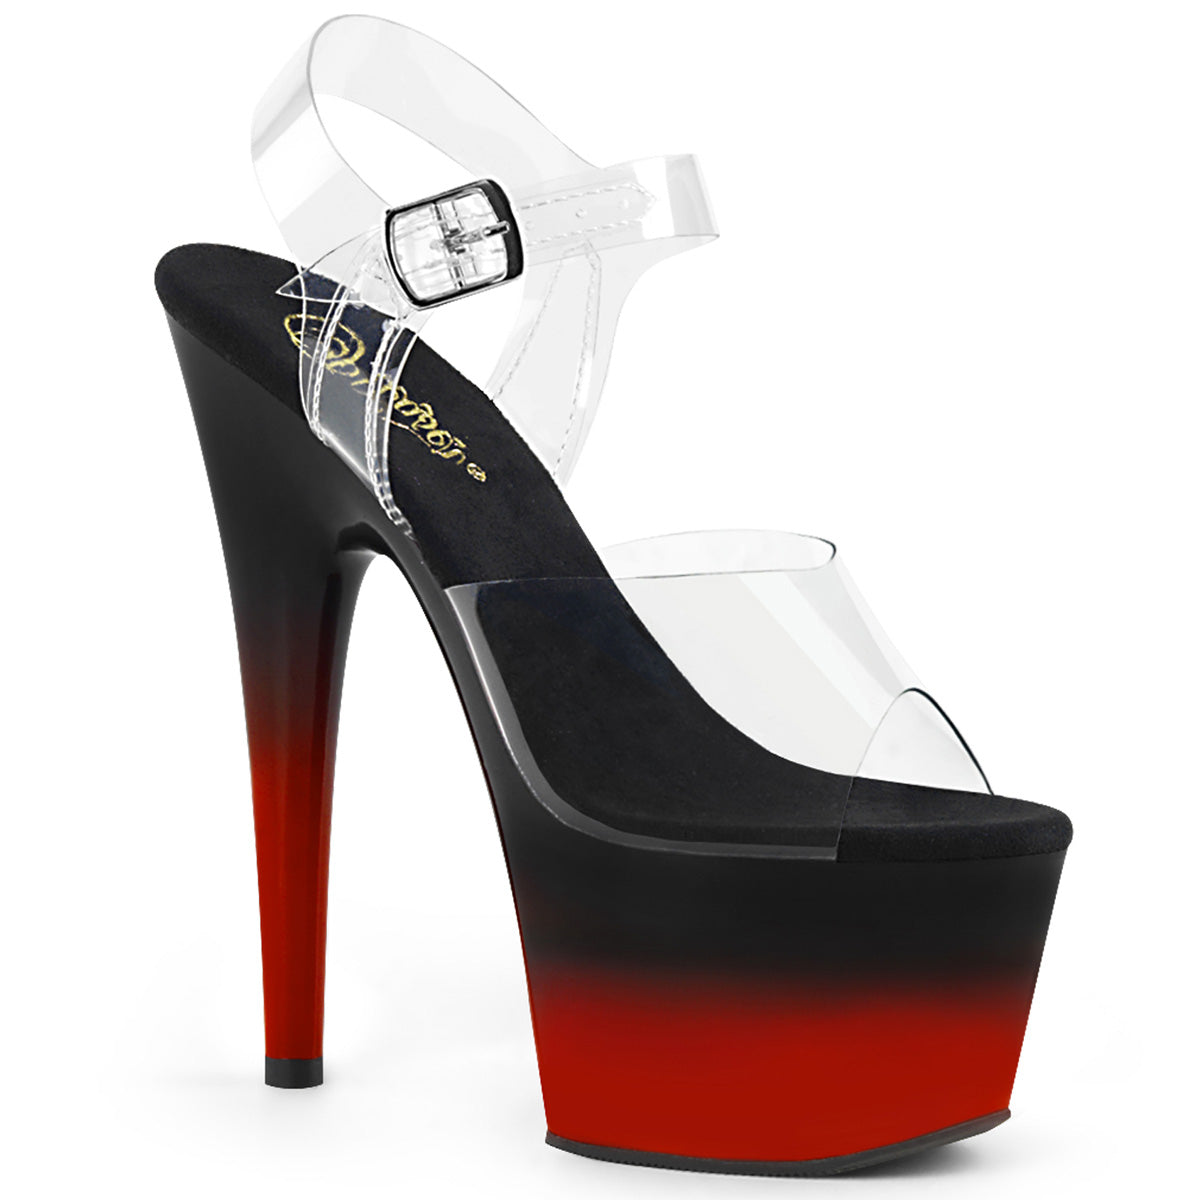 ADORE-708BR-H 7" Heel Clear Black Red Pole Dancing Sexy Shoes